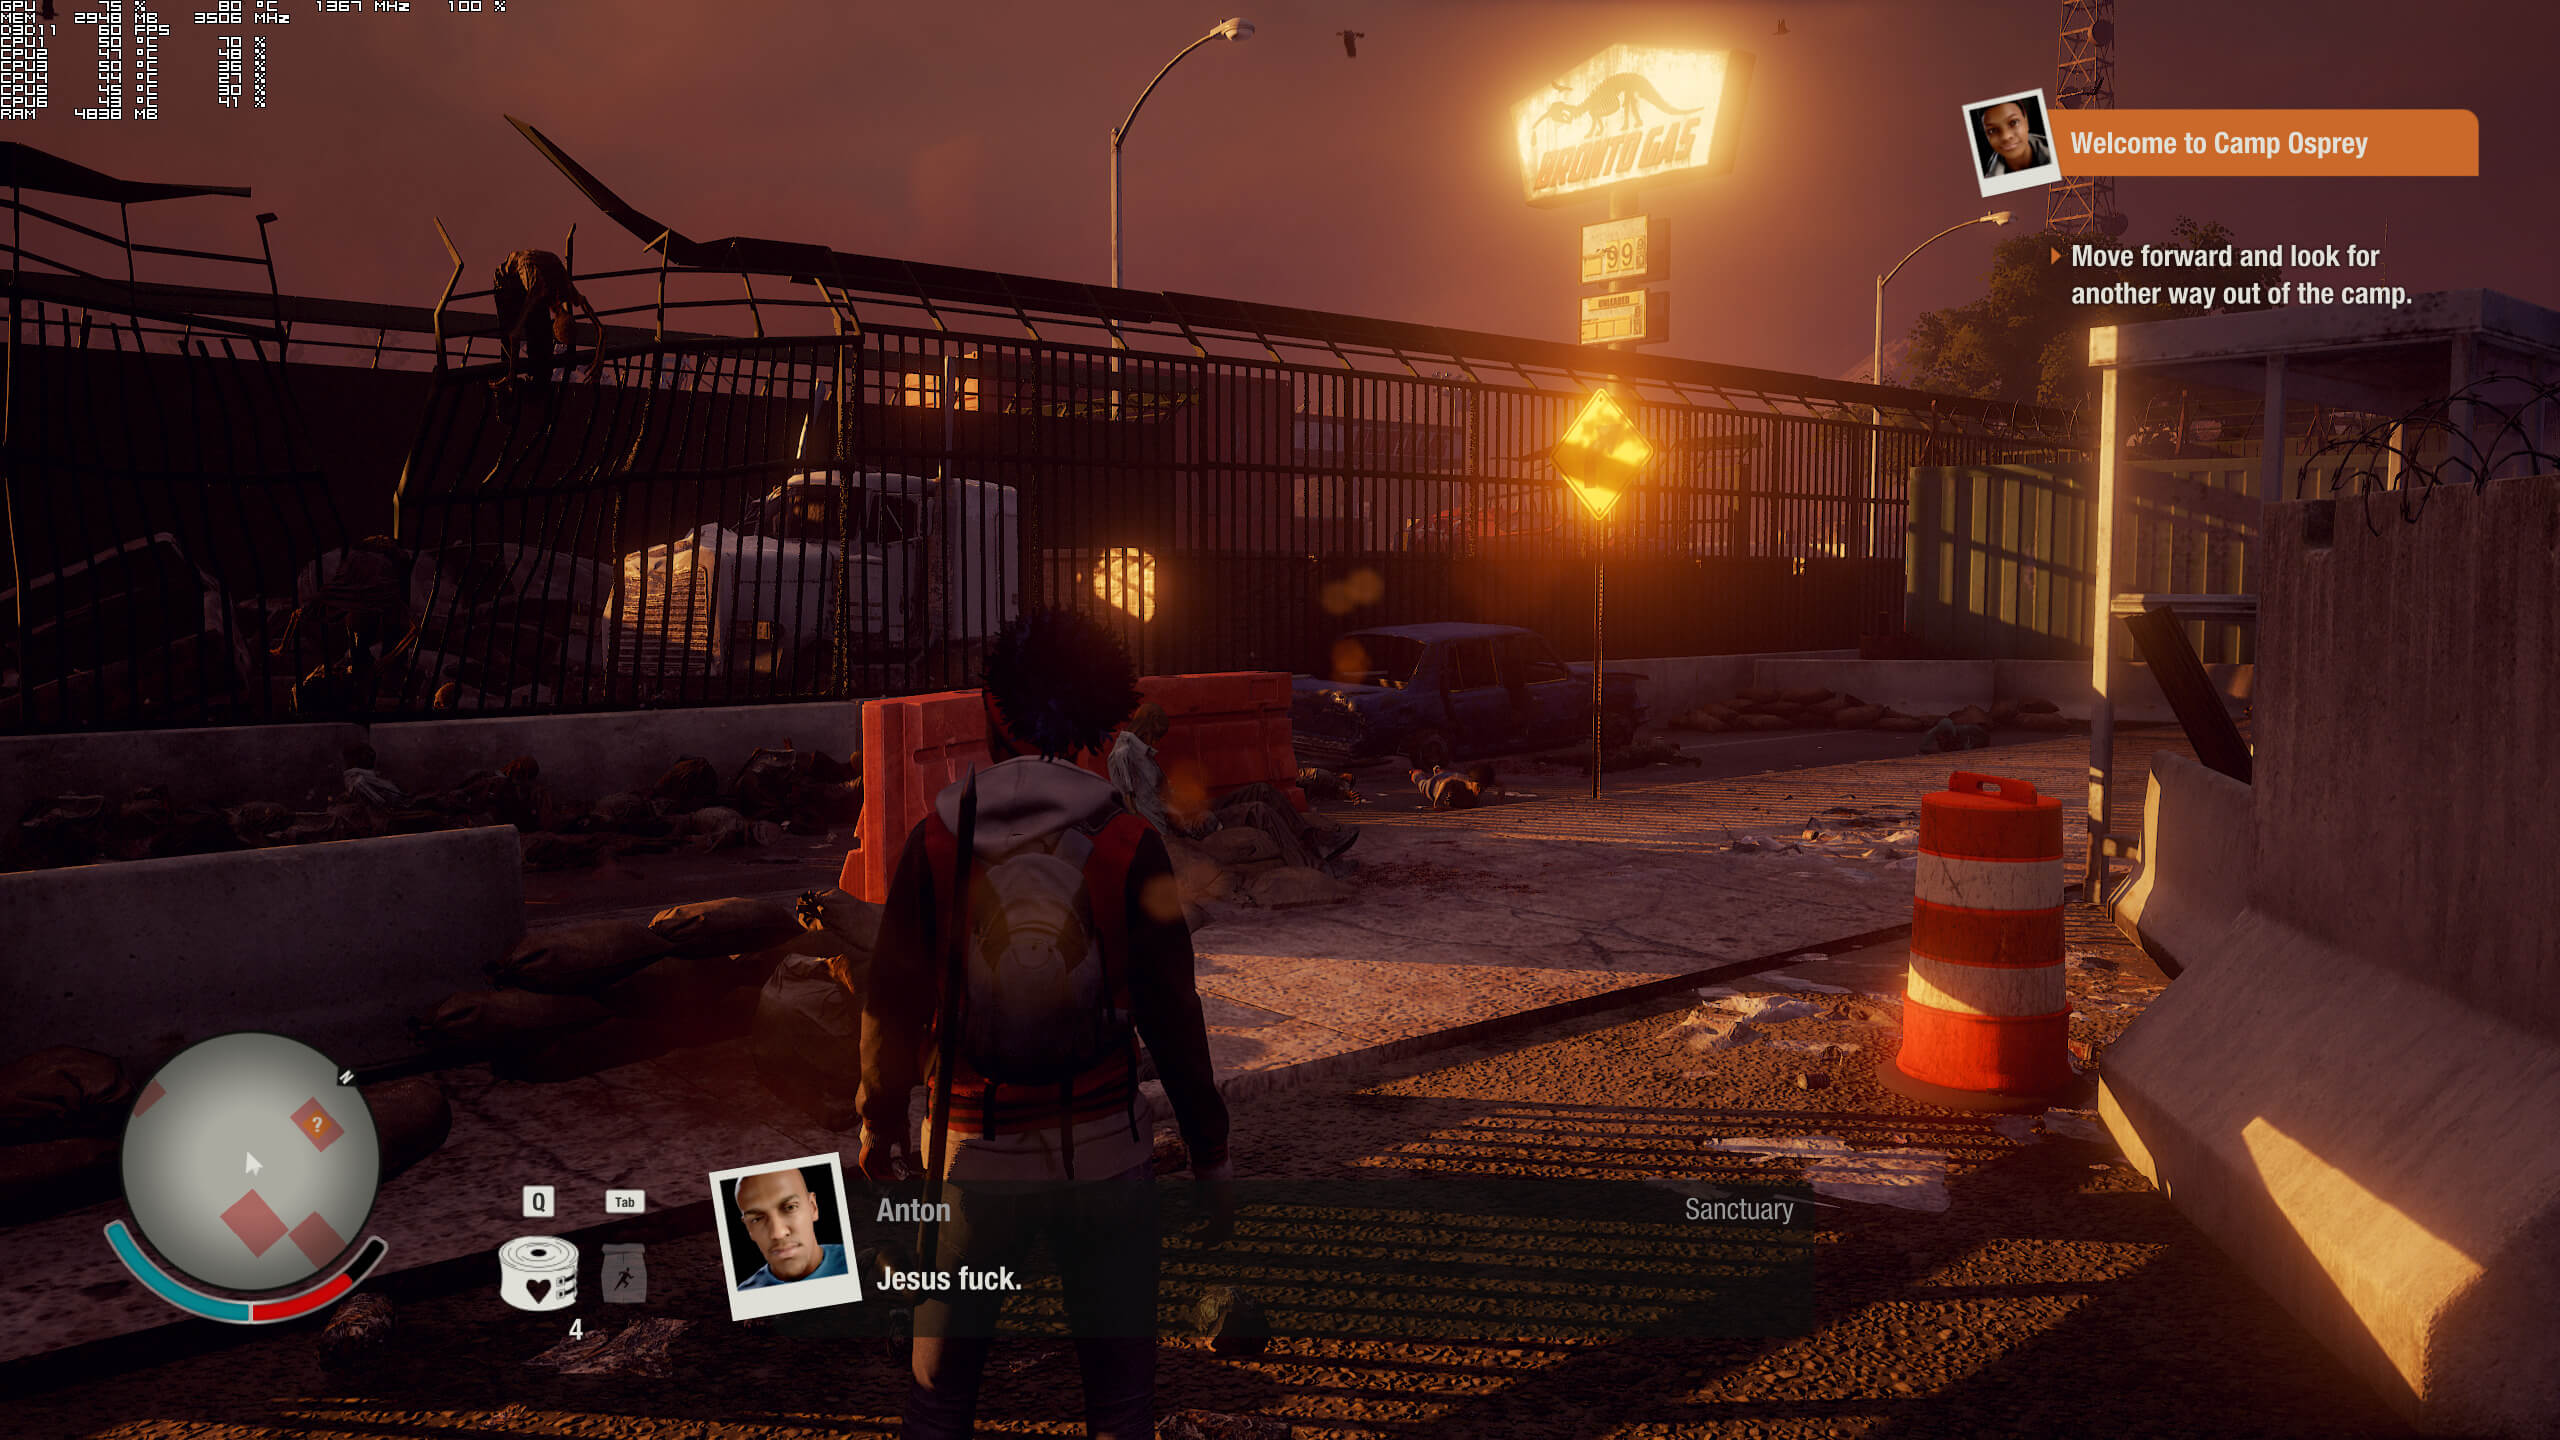 State of Decay 2 PC performance analysis: buggy around the edges